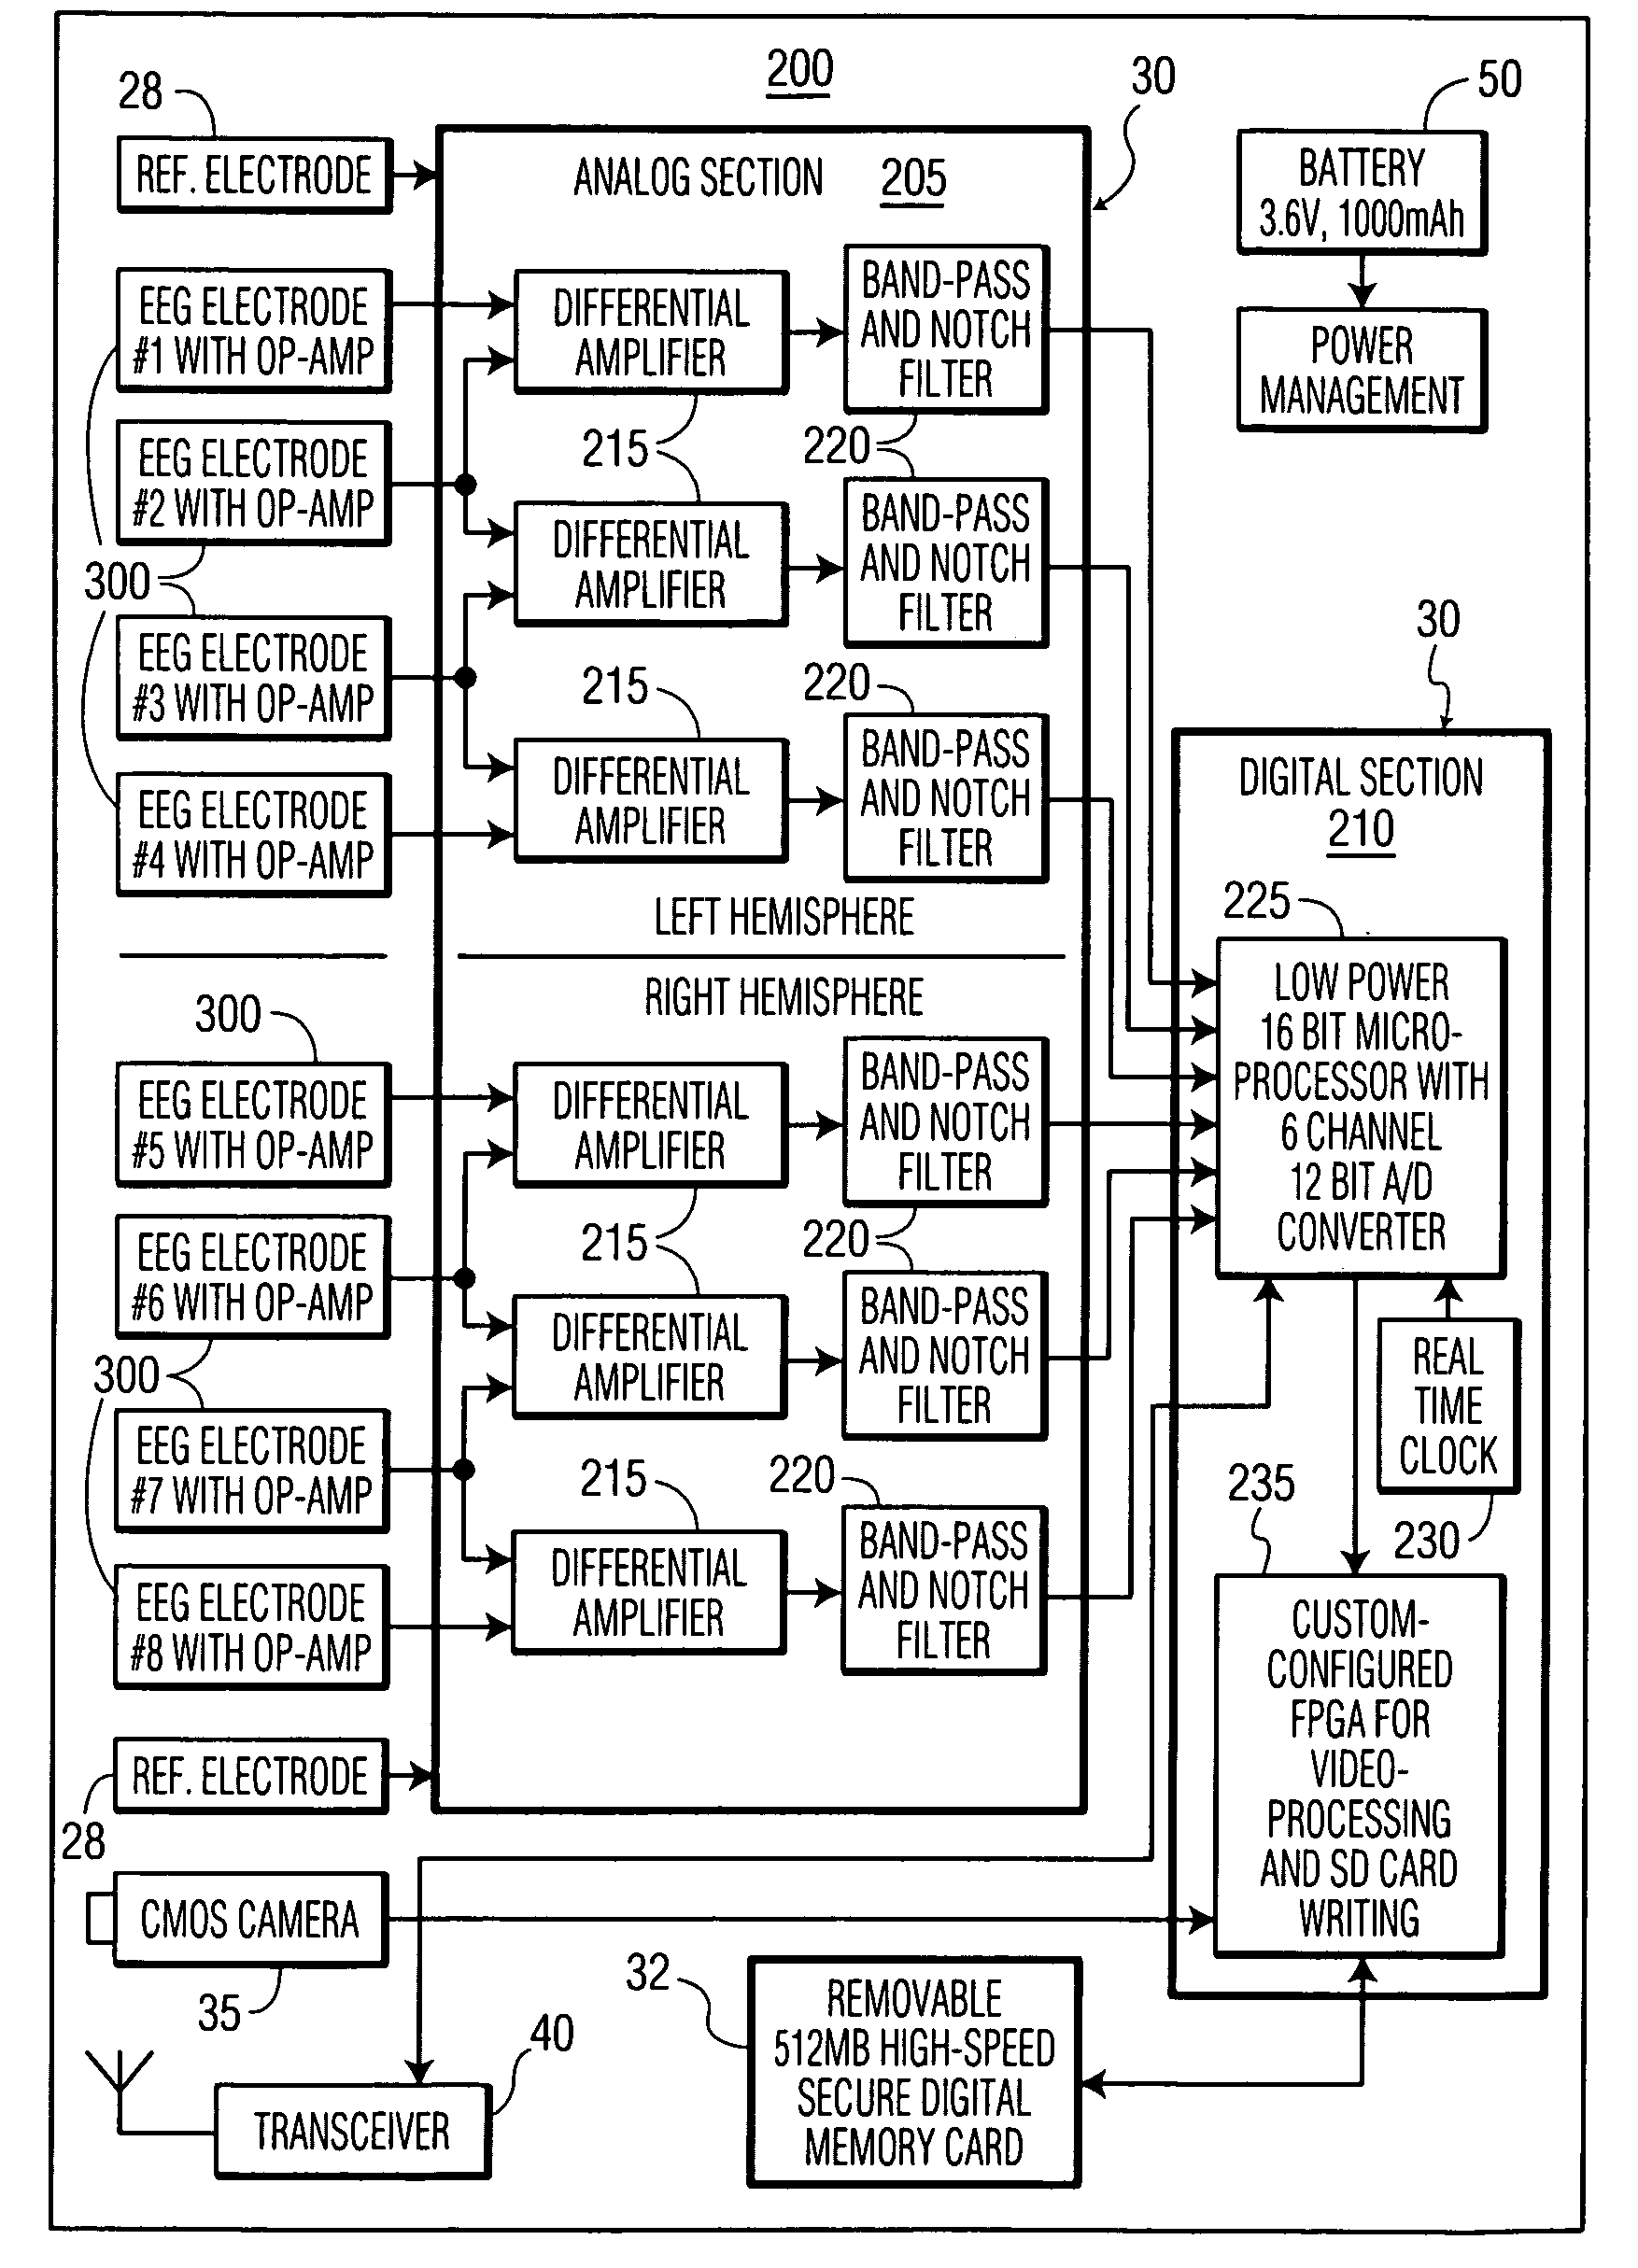 System and device for seizure detection